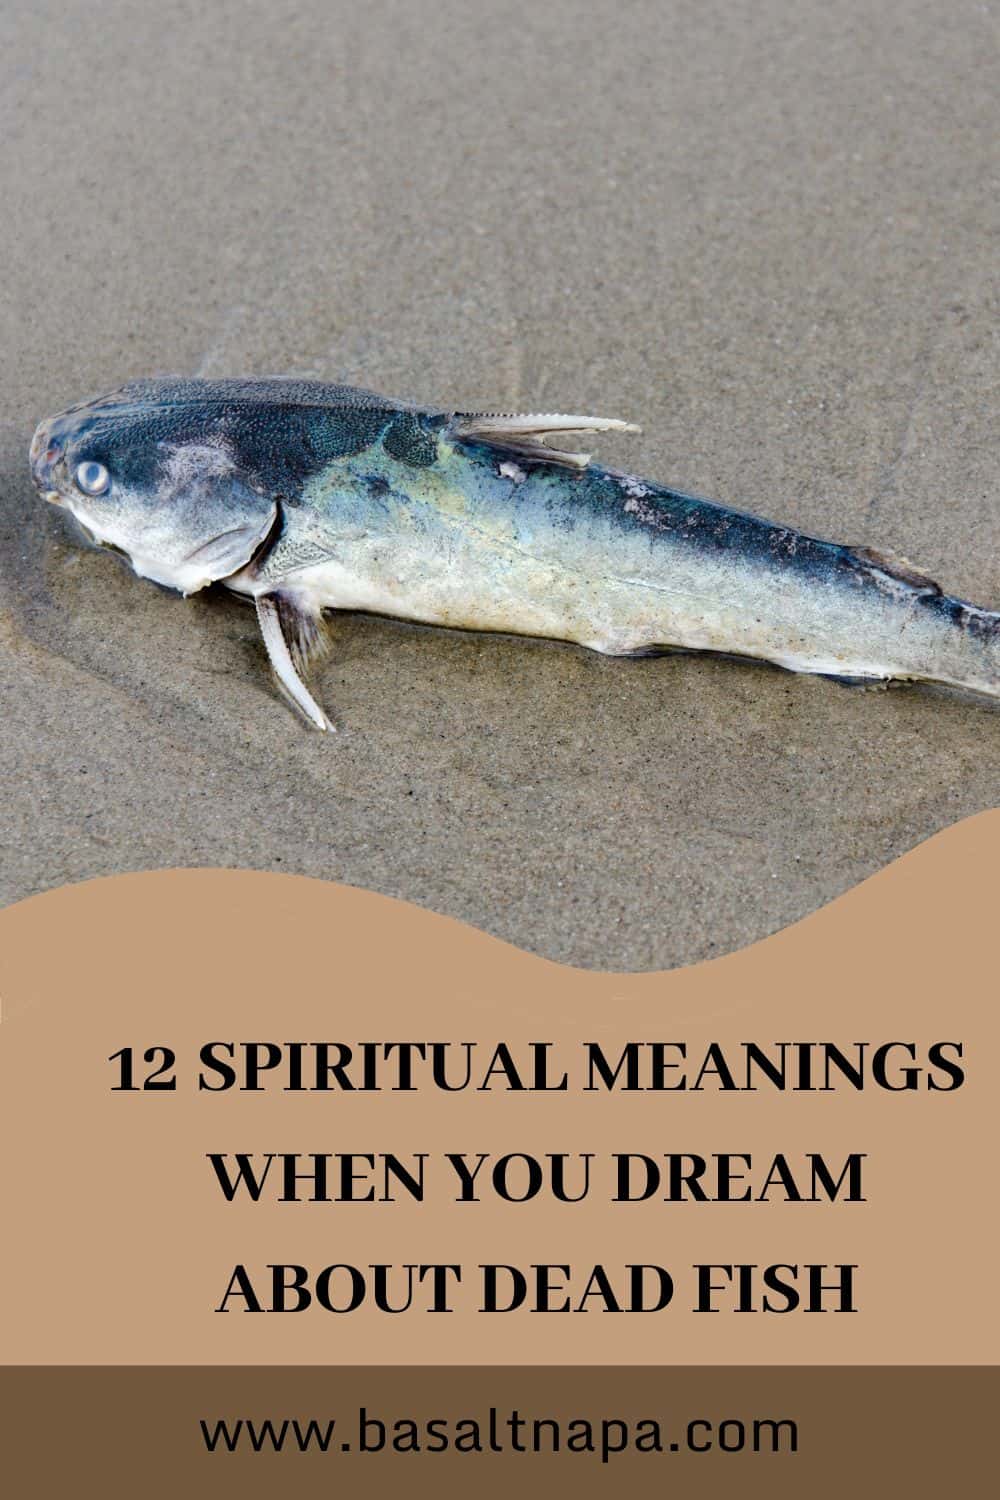 12 meanings to dreaming of dead fish